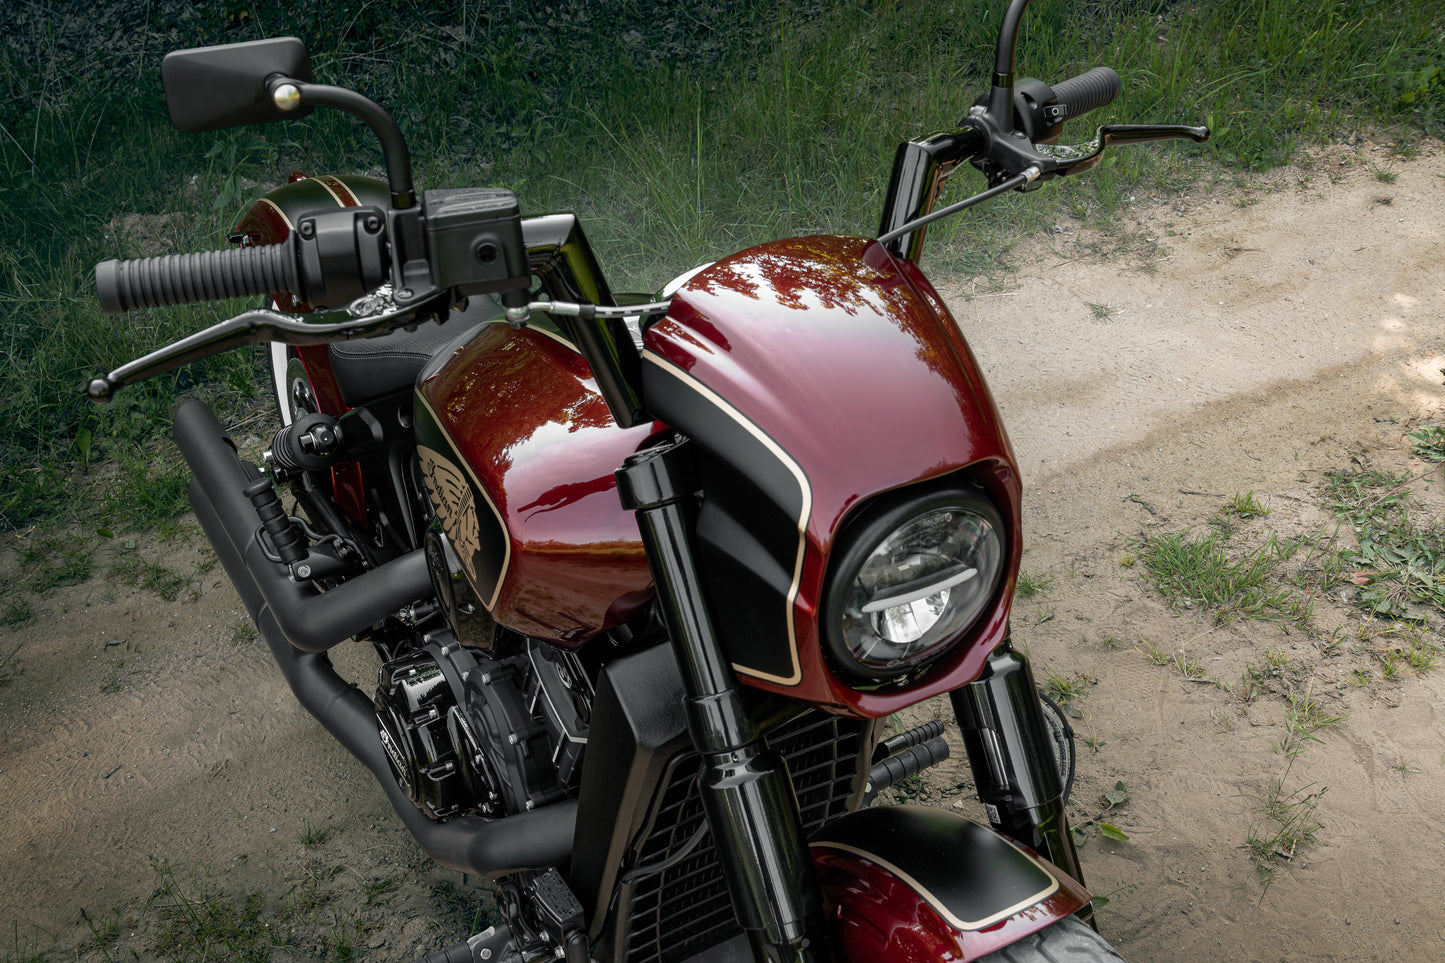 Harley Davidson motorcycle with Killer Custom "Tomahawk" series headlight fairing from above in the forest